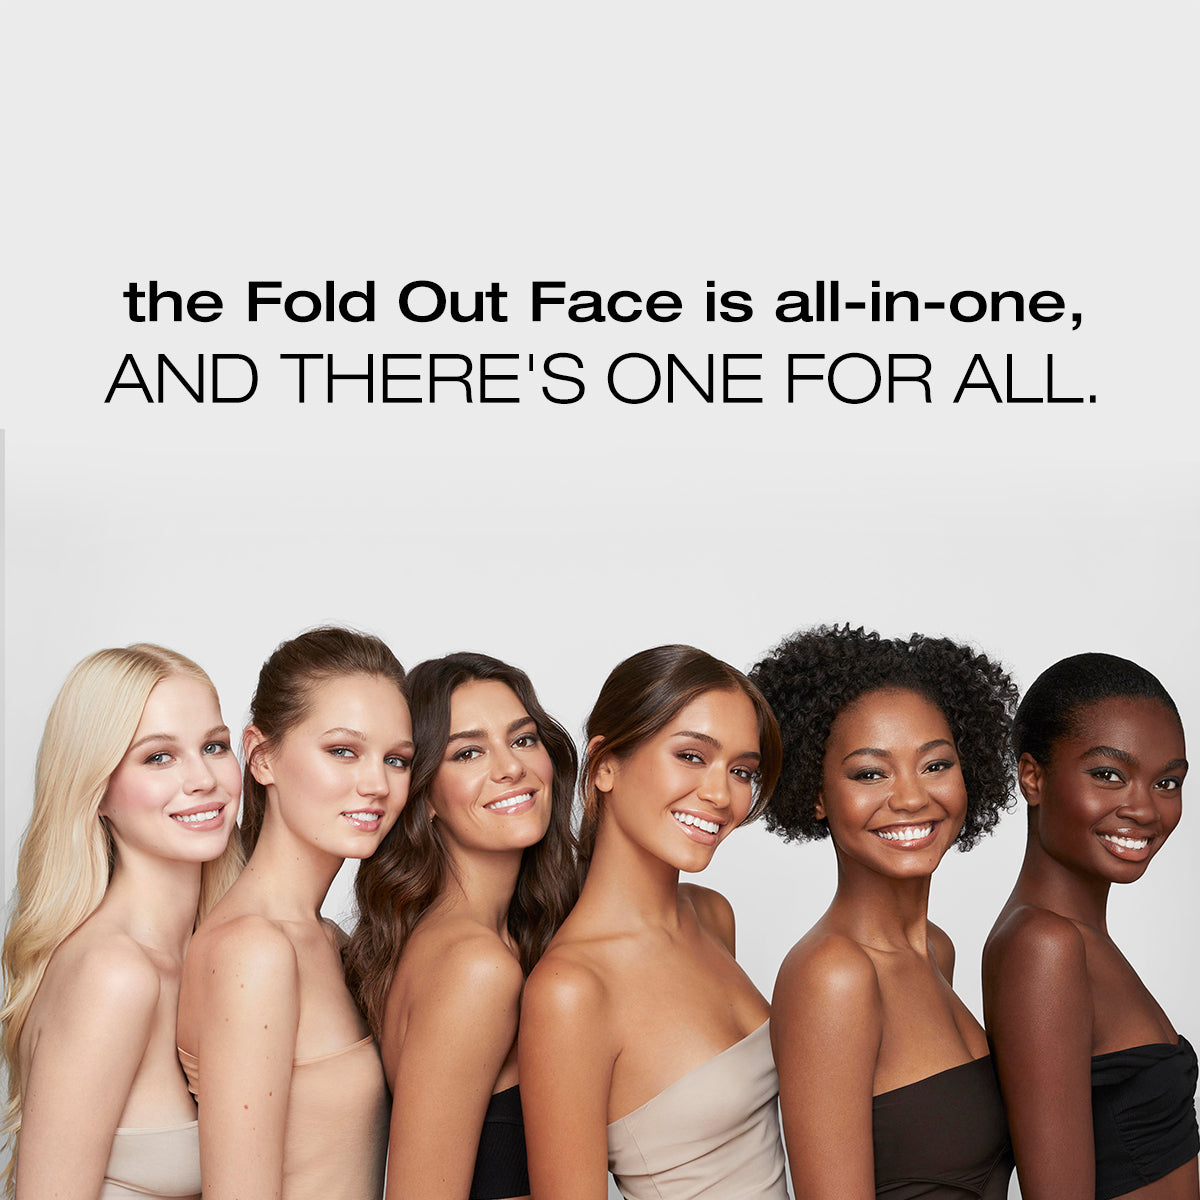 a photo of six models of different skin tones with copy saying that the fold out face palette is all in one, and there's a palette for all